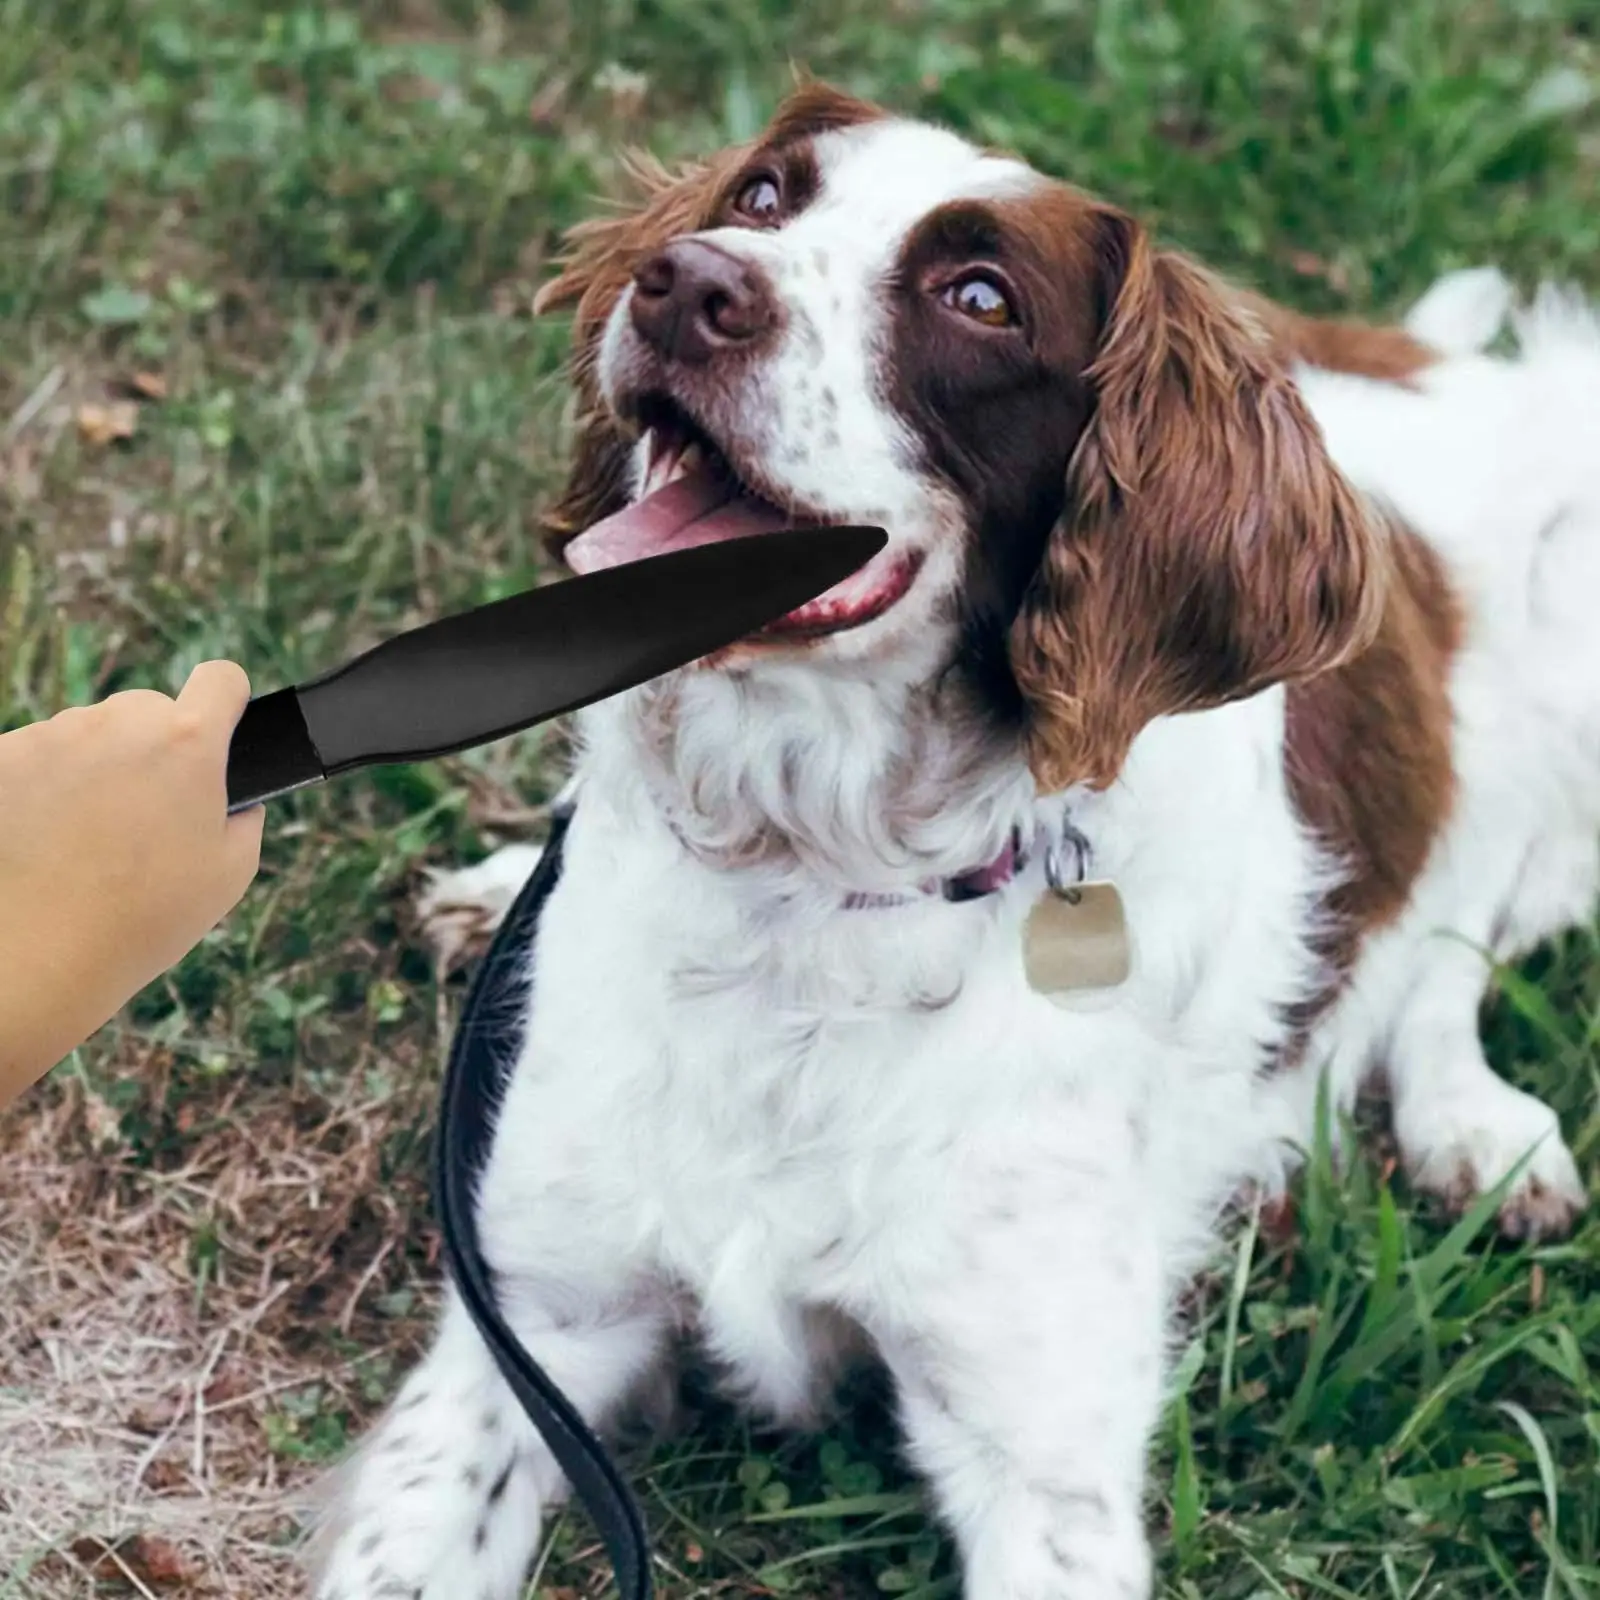 Durable Pet Crowbar Protective Chew Toys Break Stick Separates Food Aggressions Dog No Bite Sticks for Training Strong Dogs